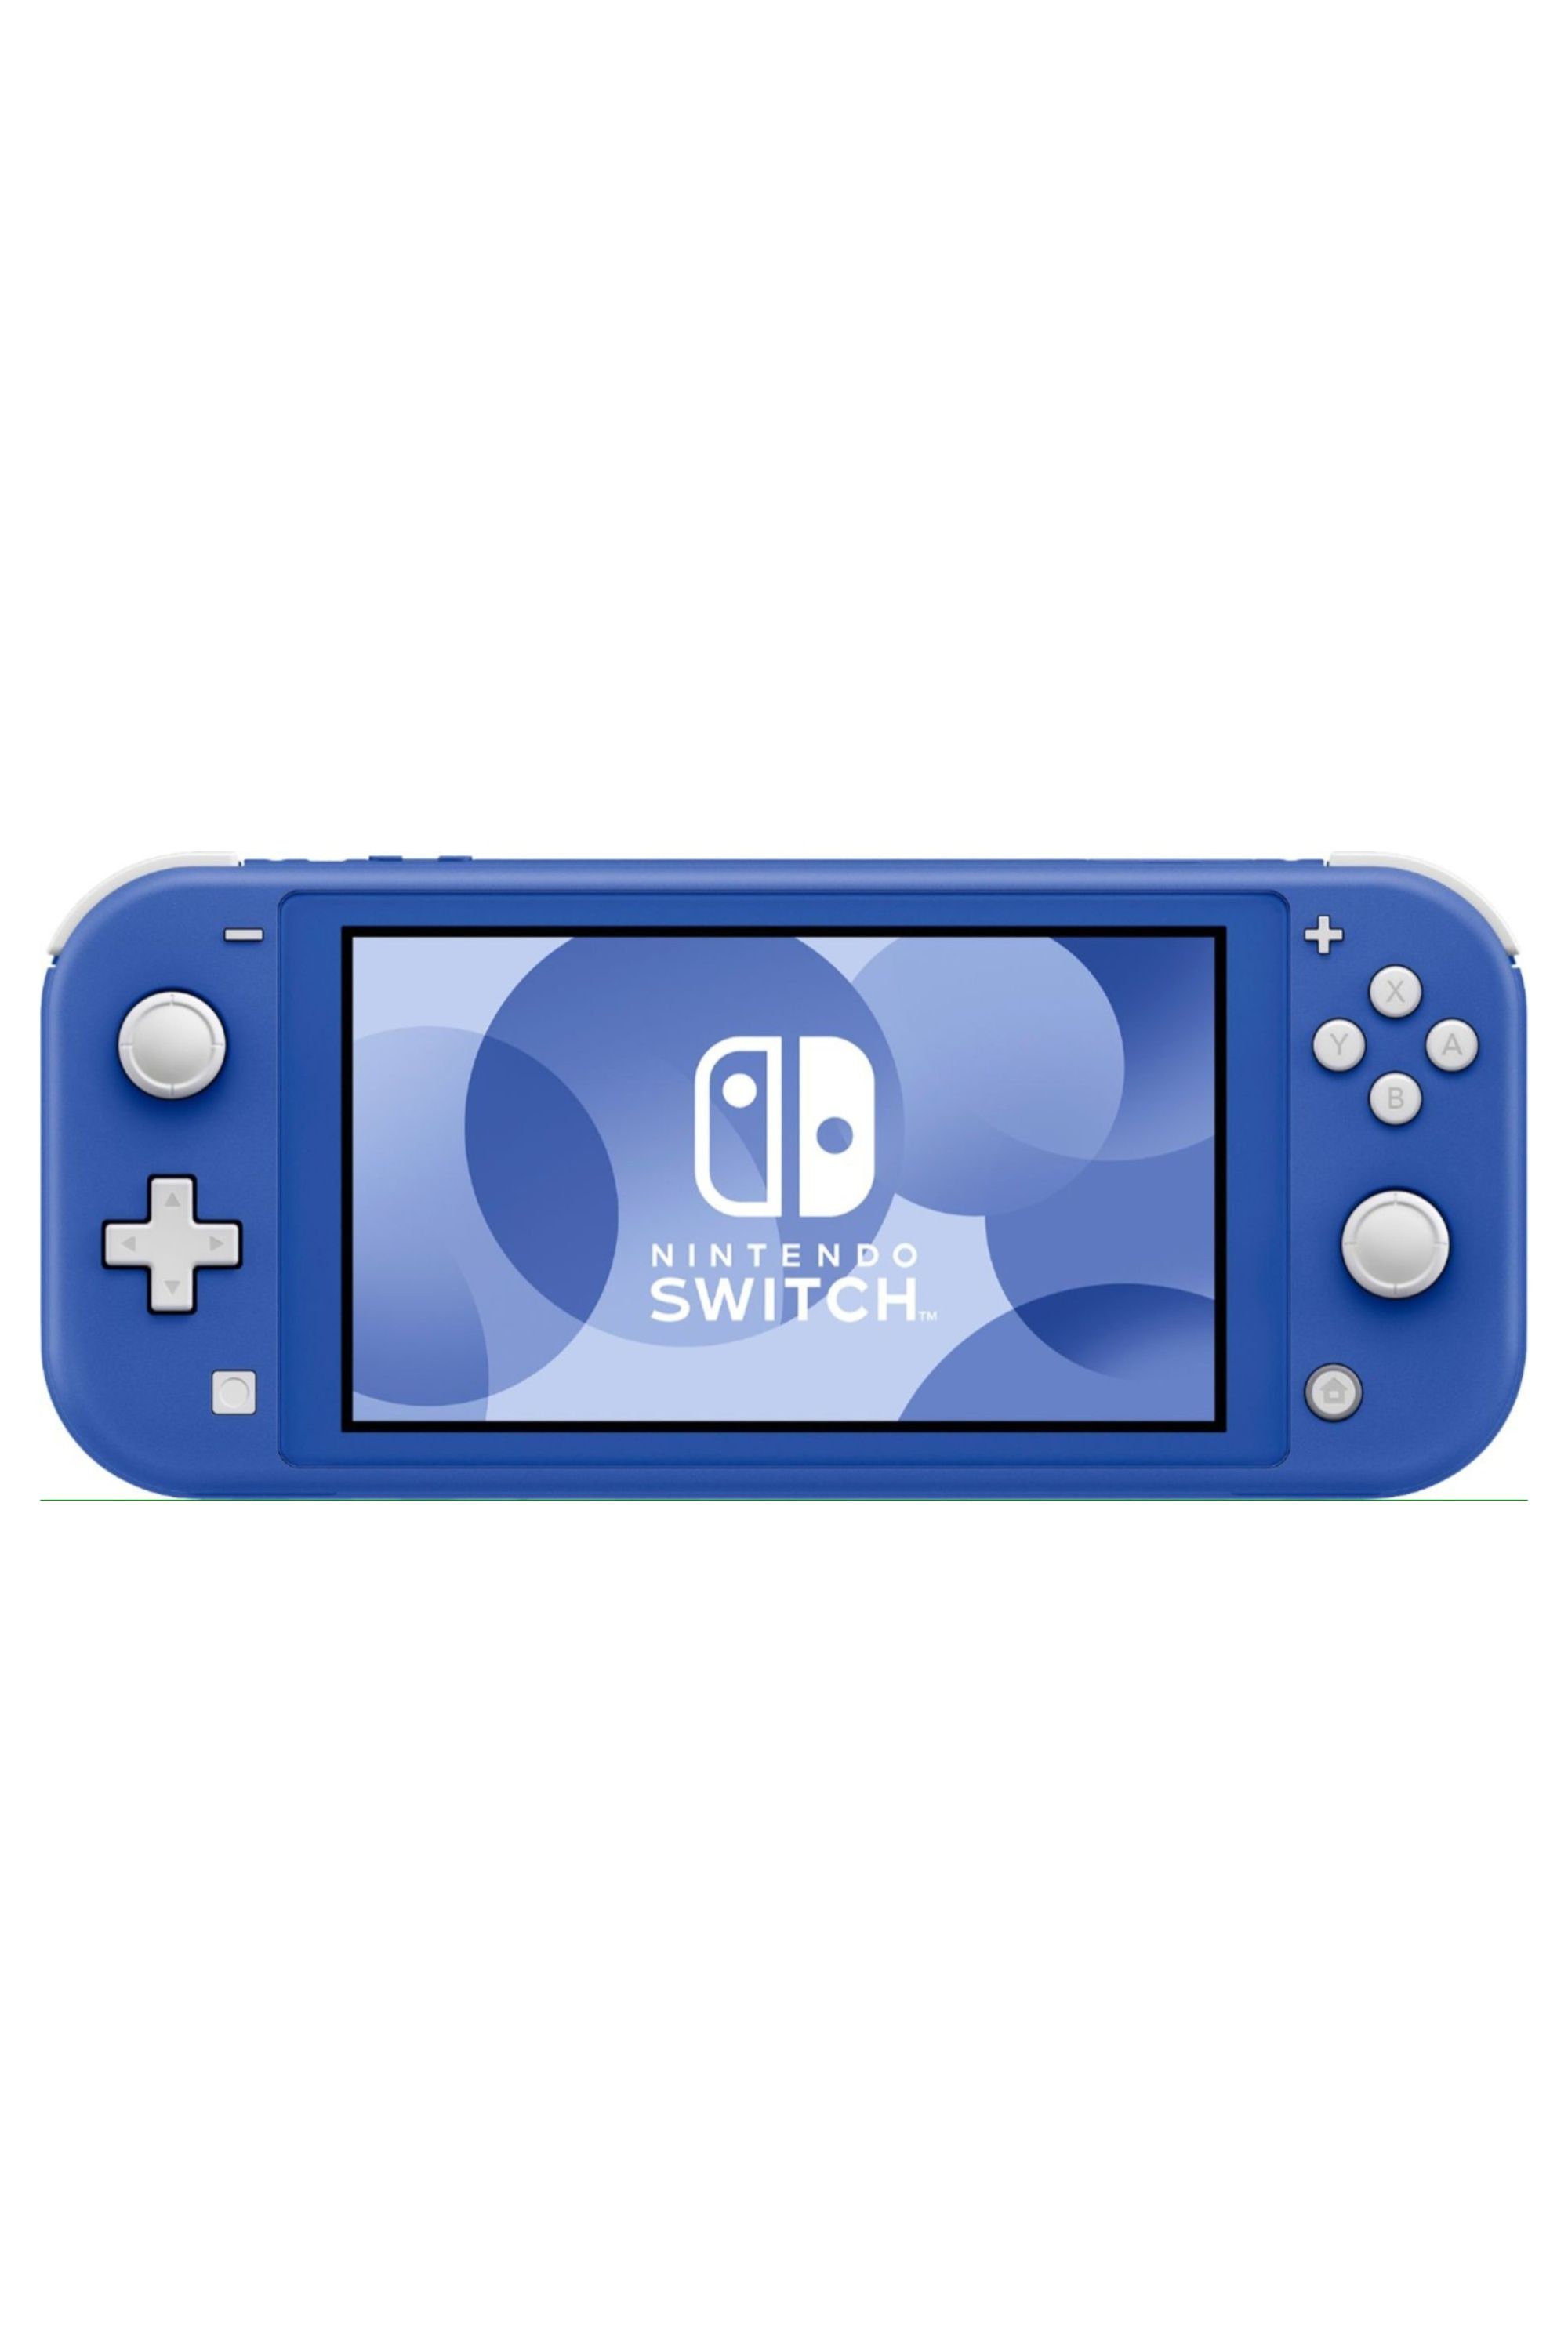 A Comparison Of The Nintendo Switch And Nintendo Switch Lite